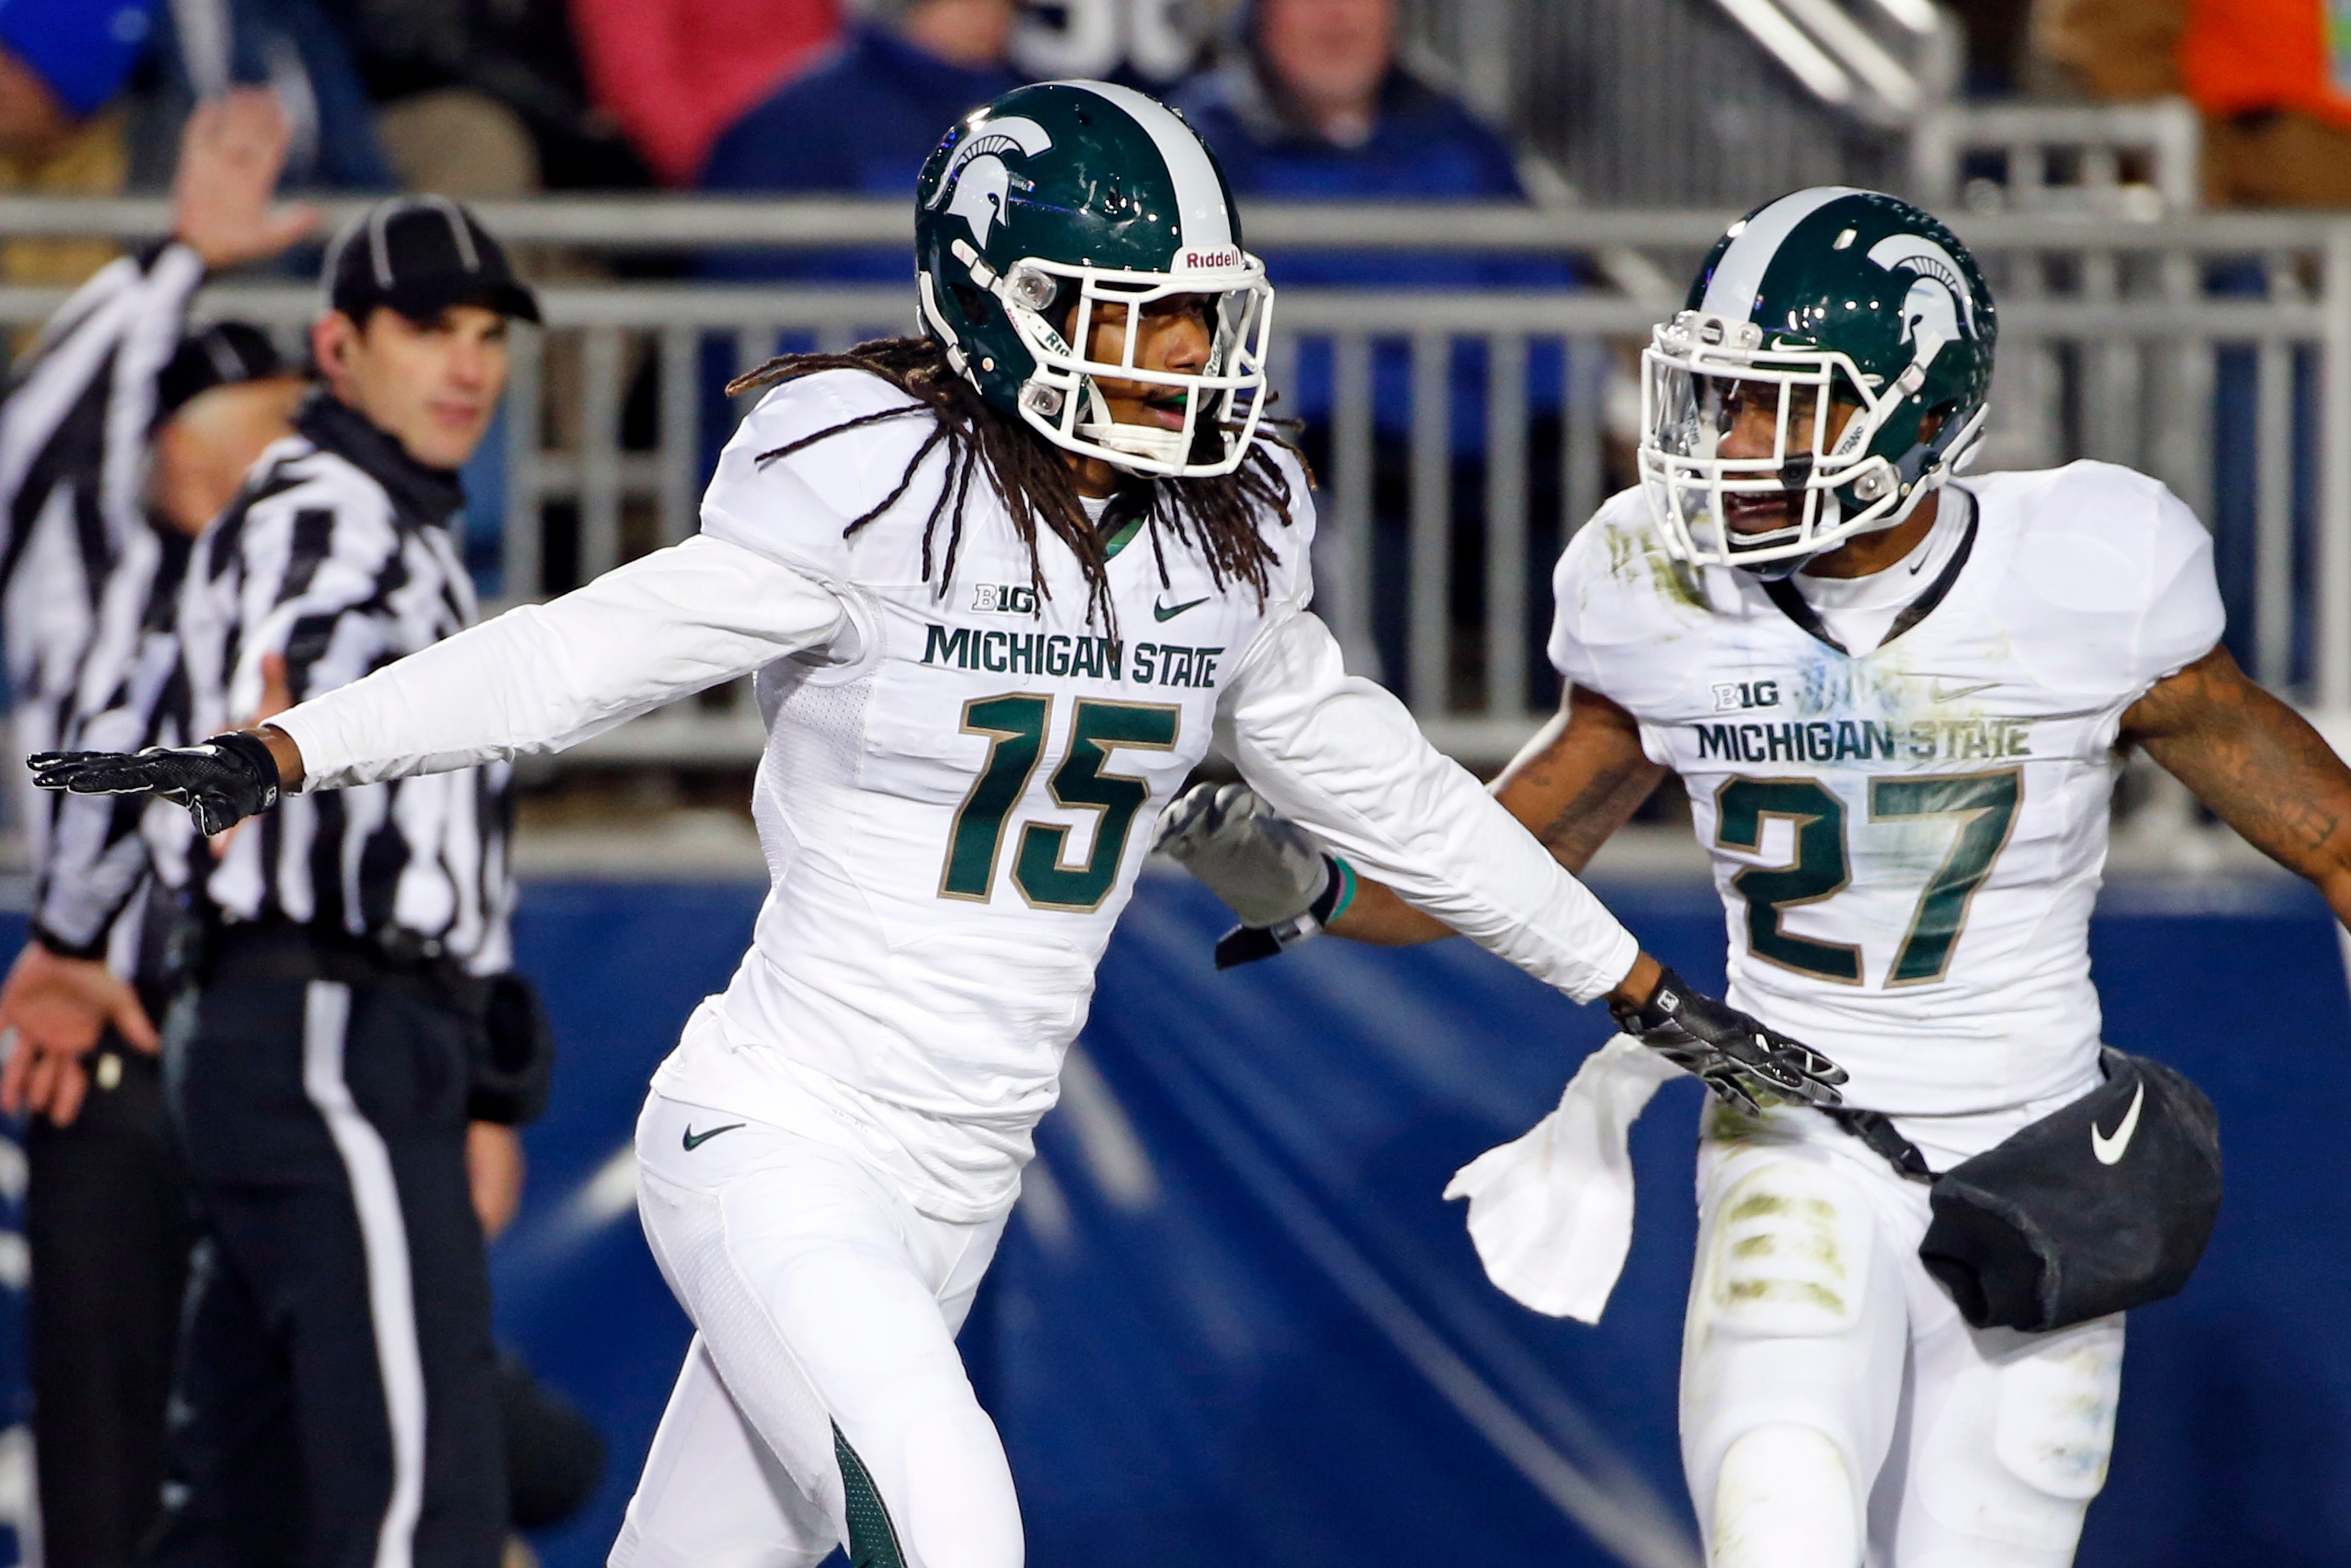 CORNERBACK – Trae Waynes, 2012-14: A Thorpe Award semifinalist as a junior in 2014, Waynes left a year early and became the highest drafted cornerback at MSU in the modern NFL Draft era, going No. 11 overall to Minnesota. He finished his career with six interceptions and 13 pass breakups in 36 career games. A second-team All-American in 2014, Waynes became MSU's third first-team All-Big Ten cornerback under Mark Dantonio, joining Dennard and Johnny Adams.